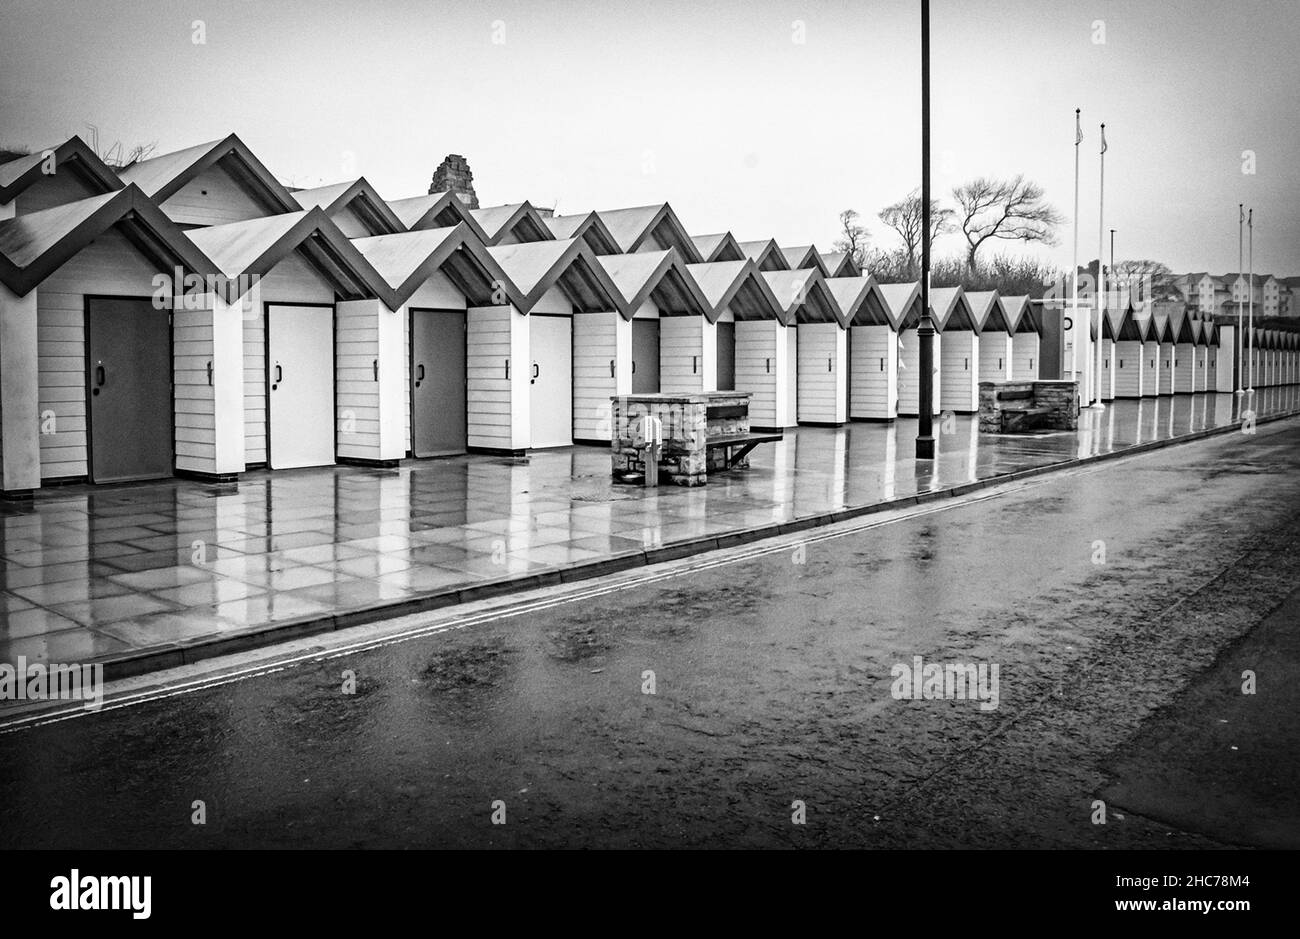 A Black and white treatment of Swanage seaside huts reflected on a wet day looking like an old postcard Stock Photo